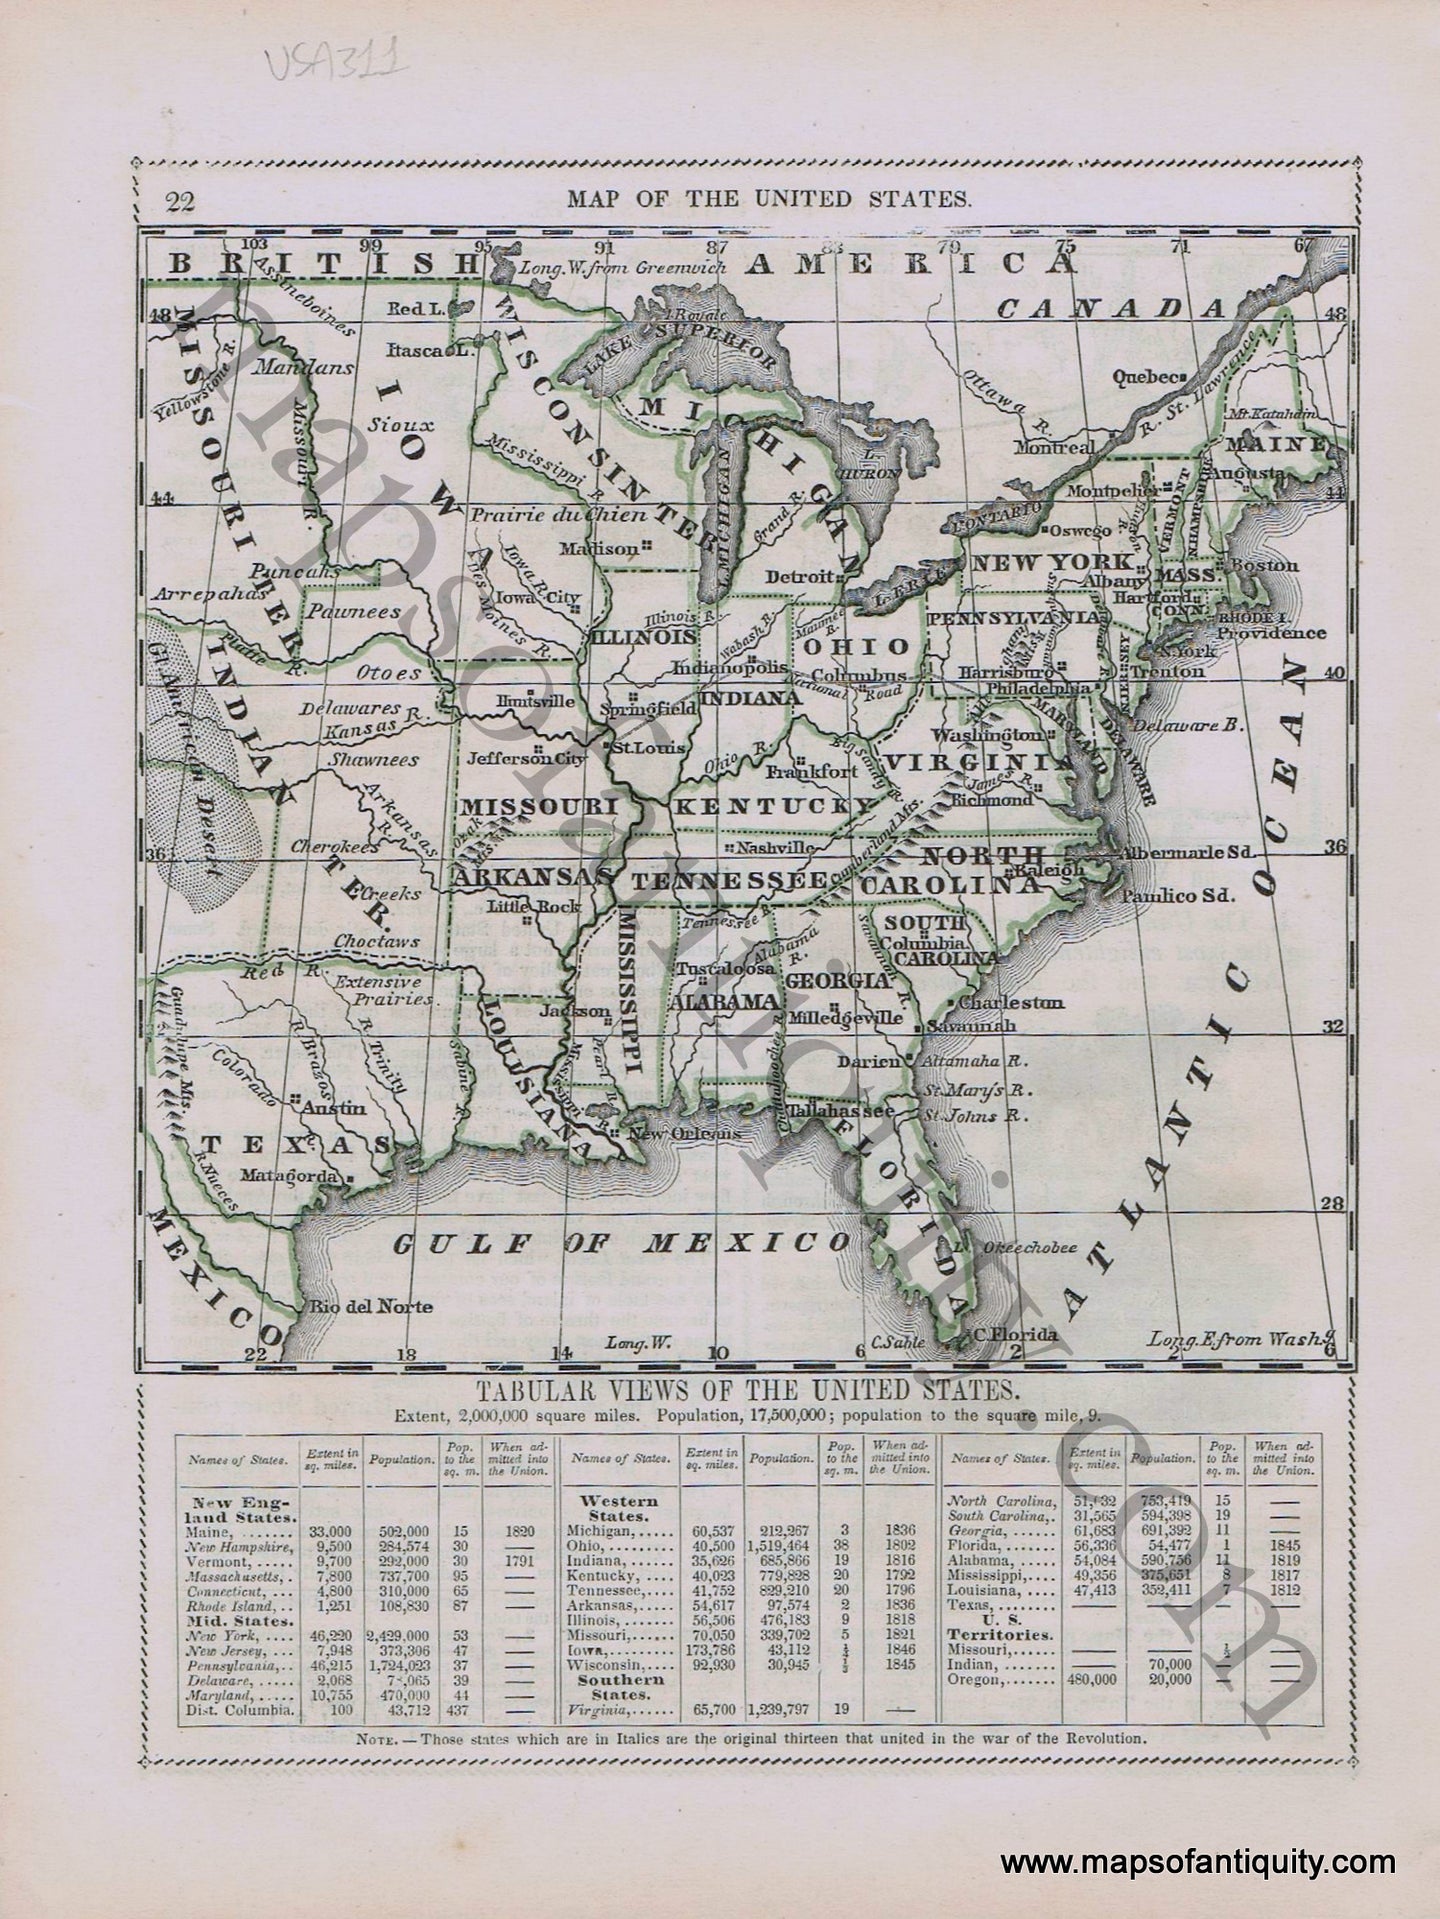 Antique-Printed-Color-Map-Map-of-the-United-States-1848-Goodrich-United-States-1800s-19th-century-Maps-of-Antiquity